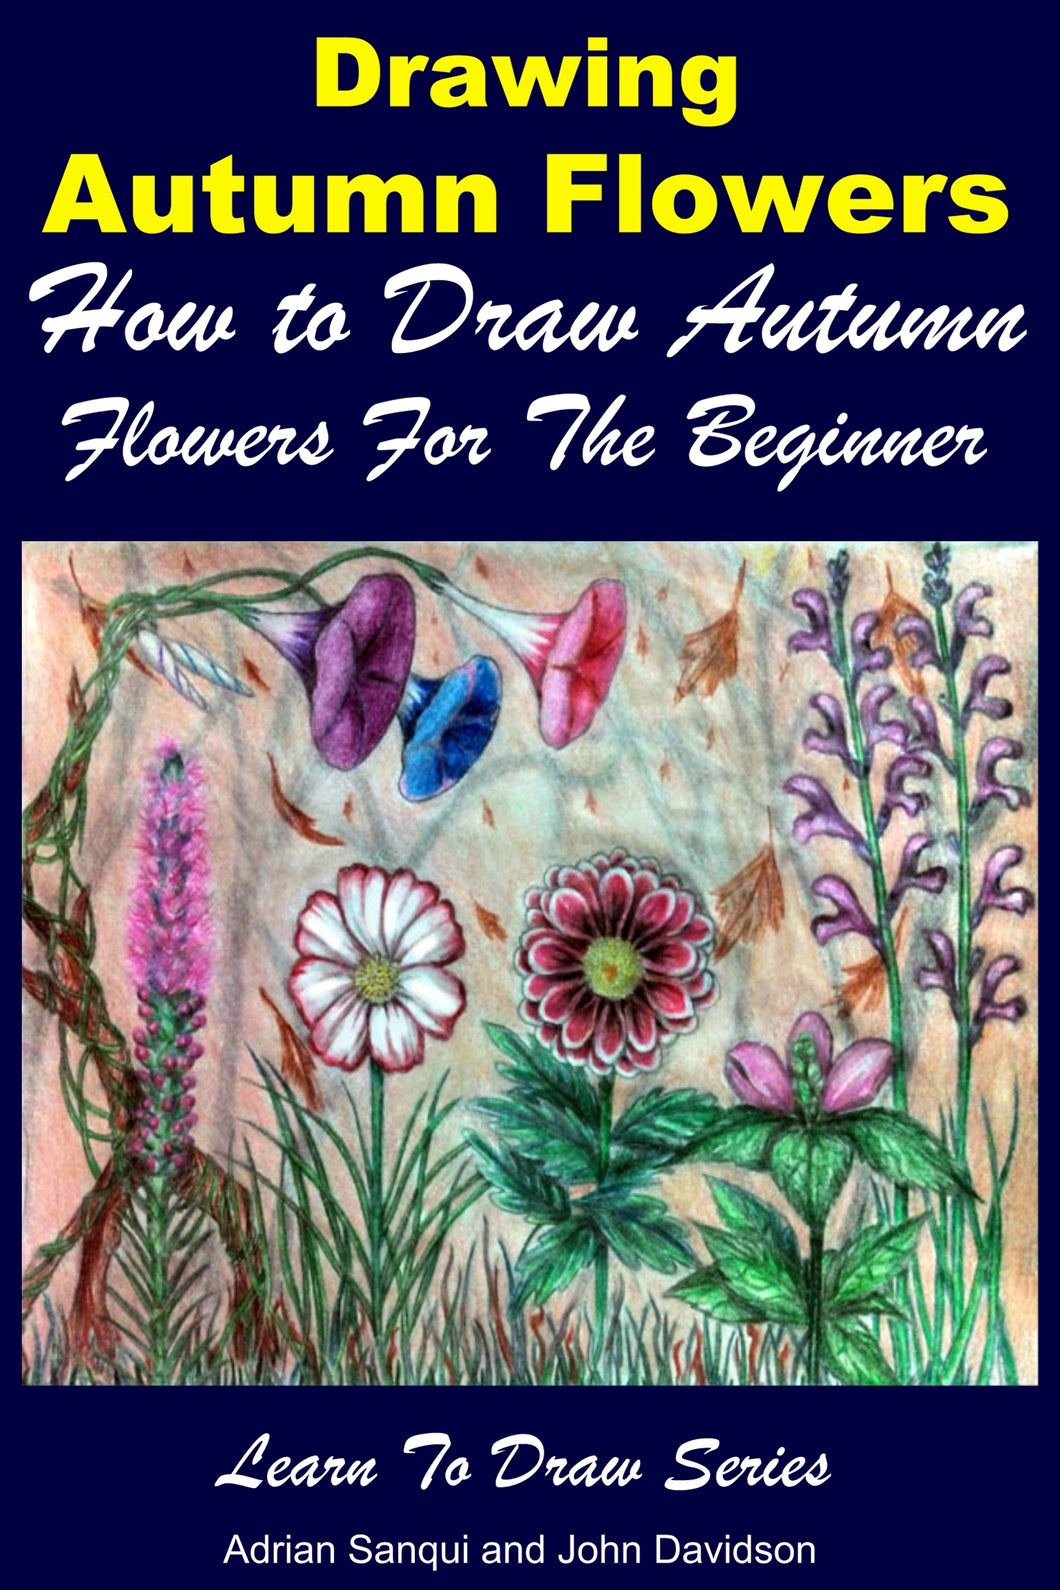 Drawing Autumn Flowers - How to Draw Autumn Flowers For the Beginner